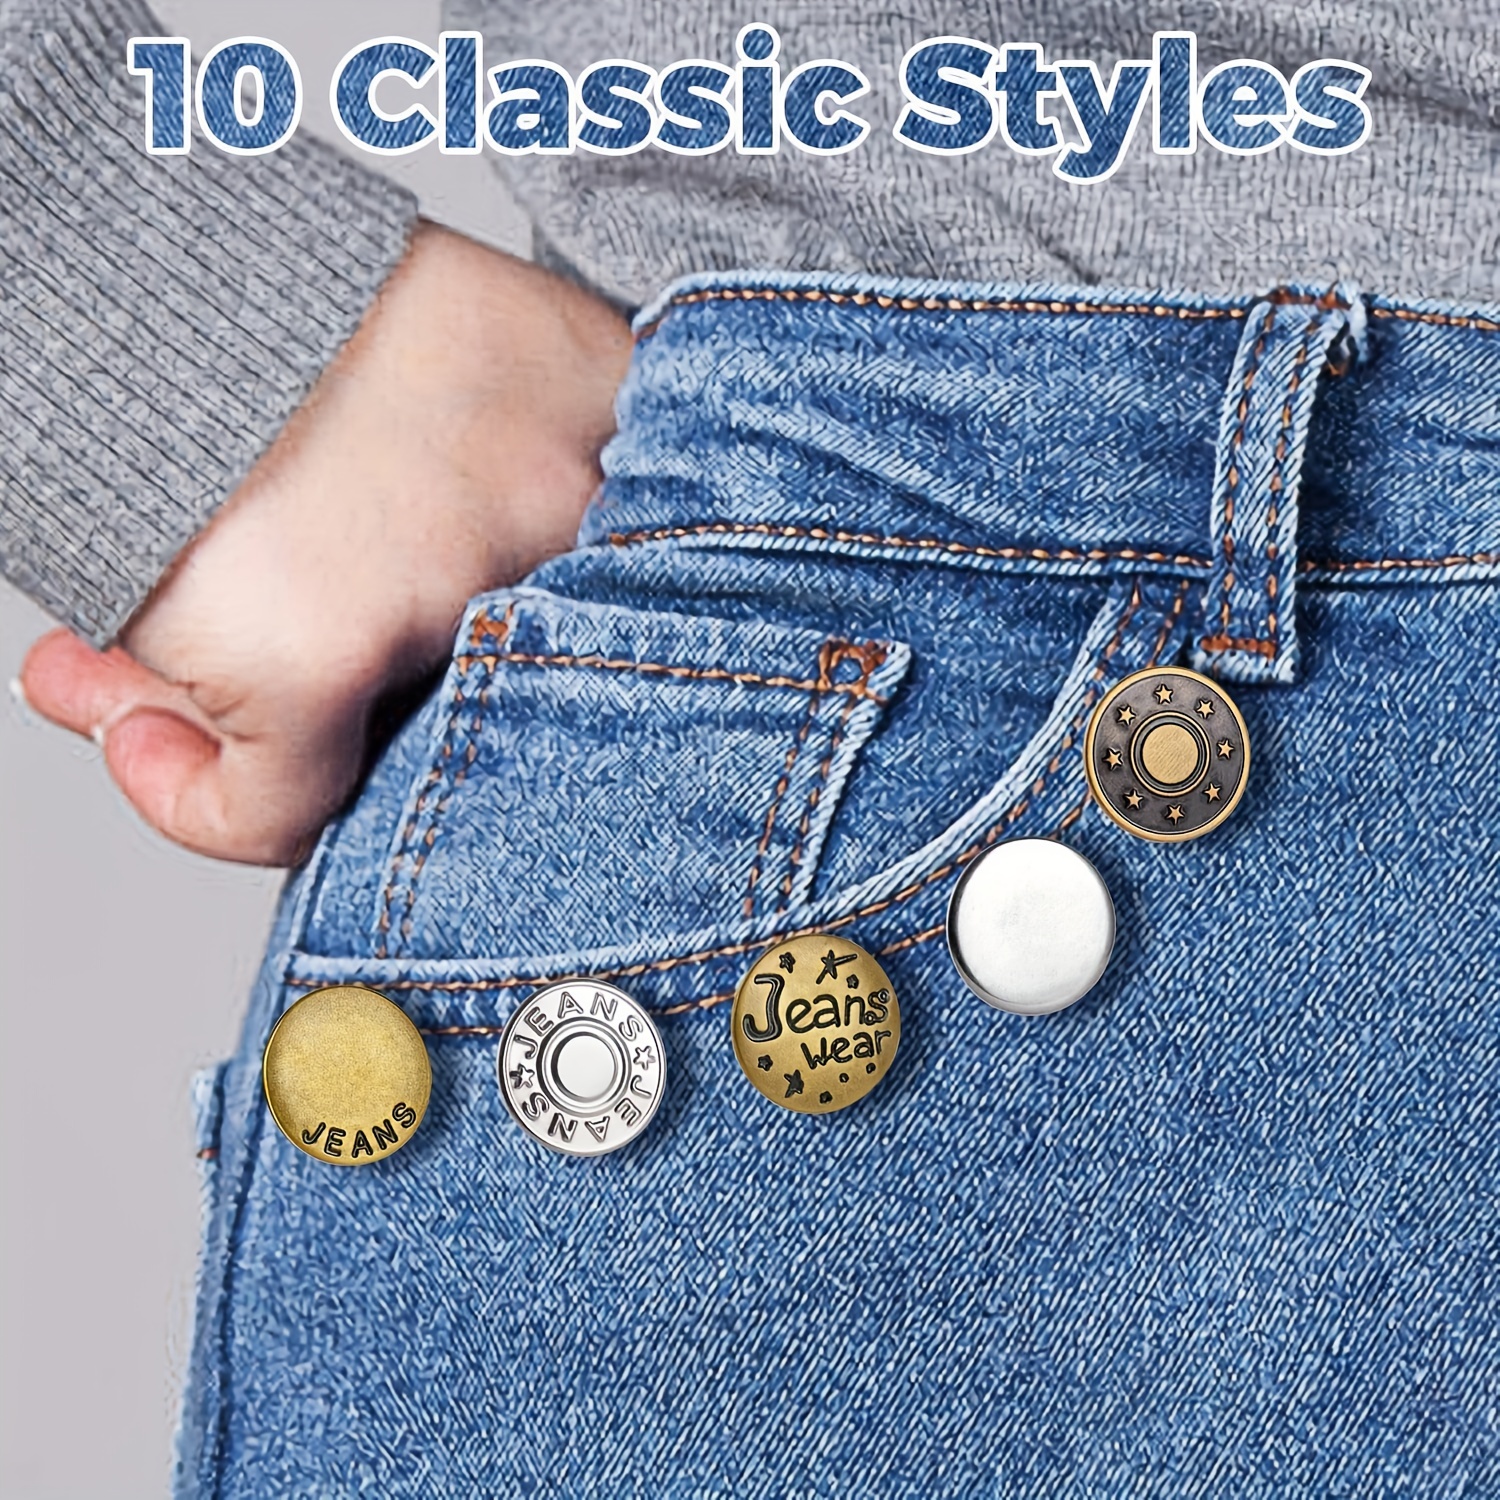 10pcs Random Jeans Buttons Replacement 17mm No Sewing Metal Button Repair  Kit Nailless Removable Jean Buttons Replacement Combo